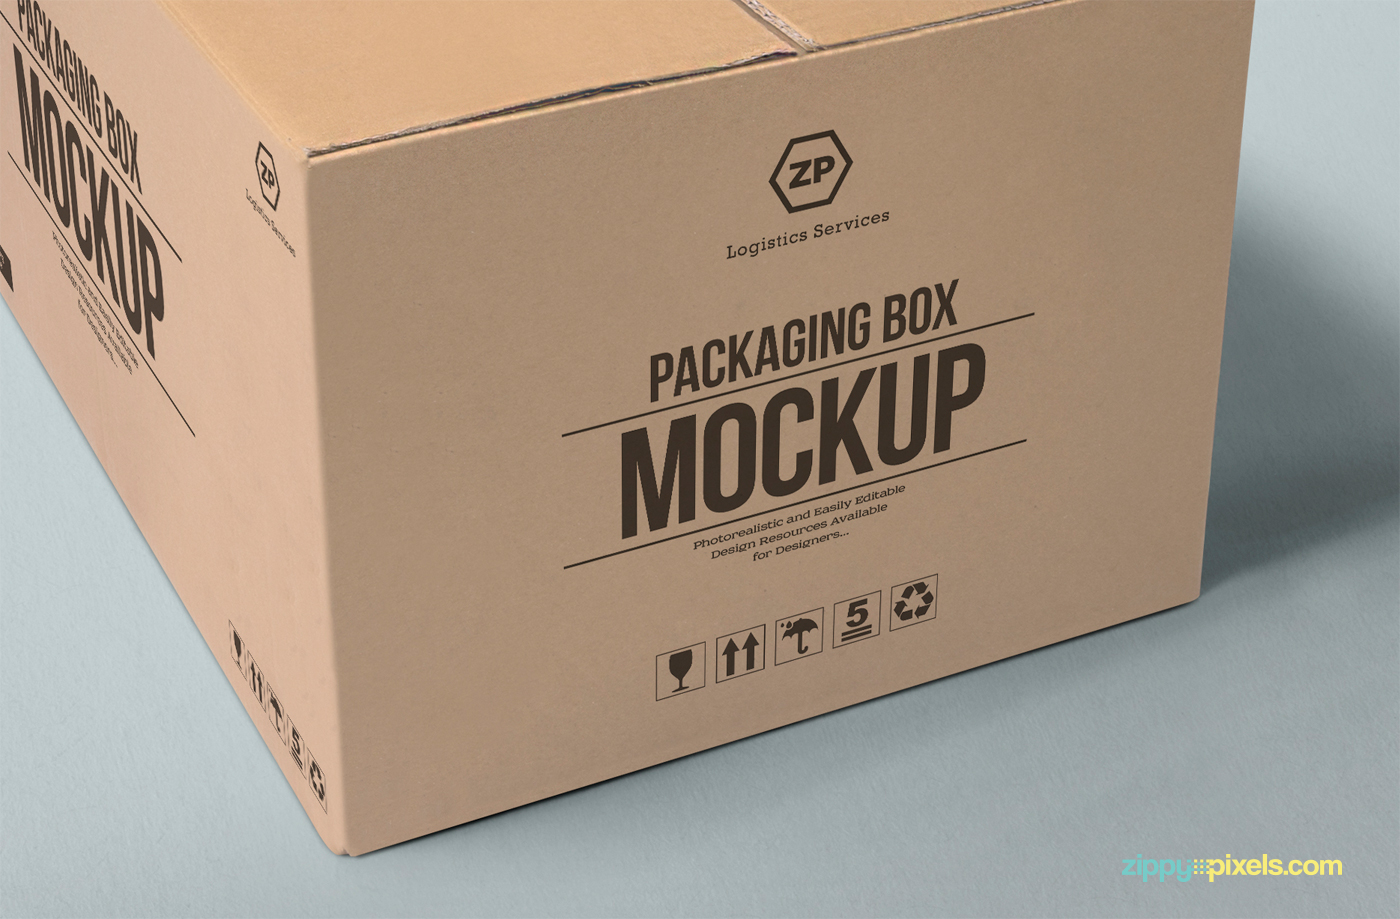 Download 2 Free Packaging Box Mockups by ZippyPixels on Dribbble